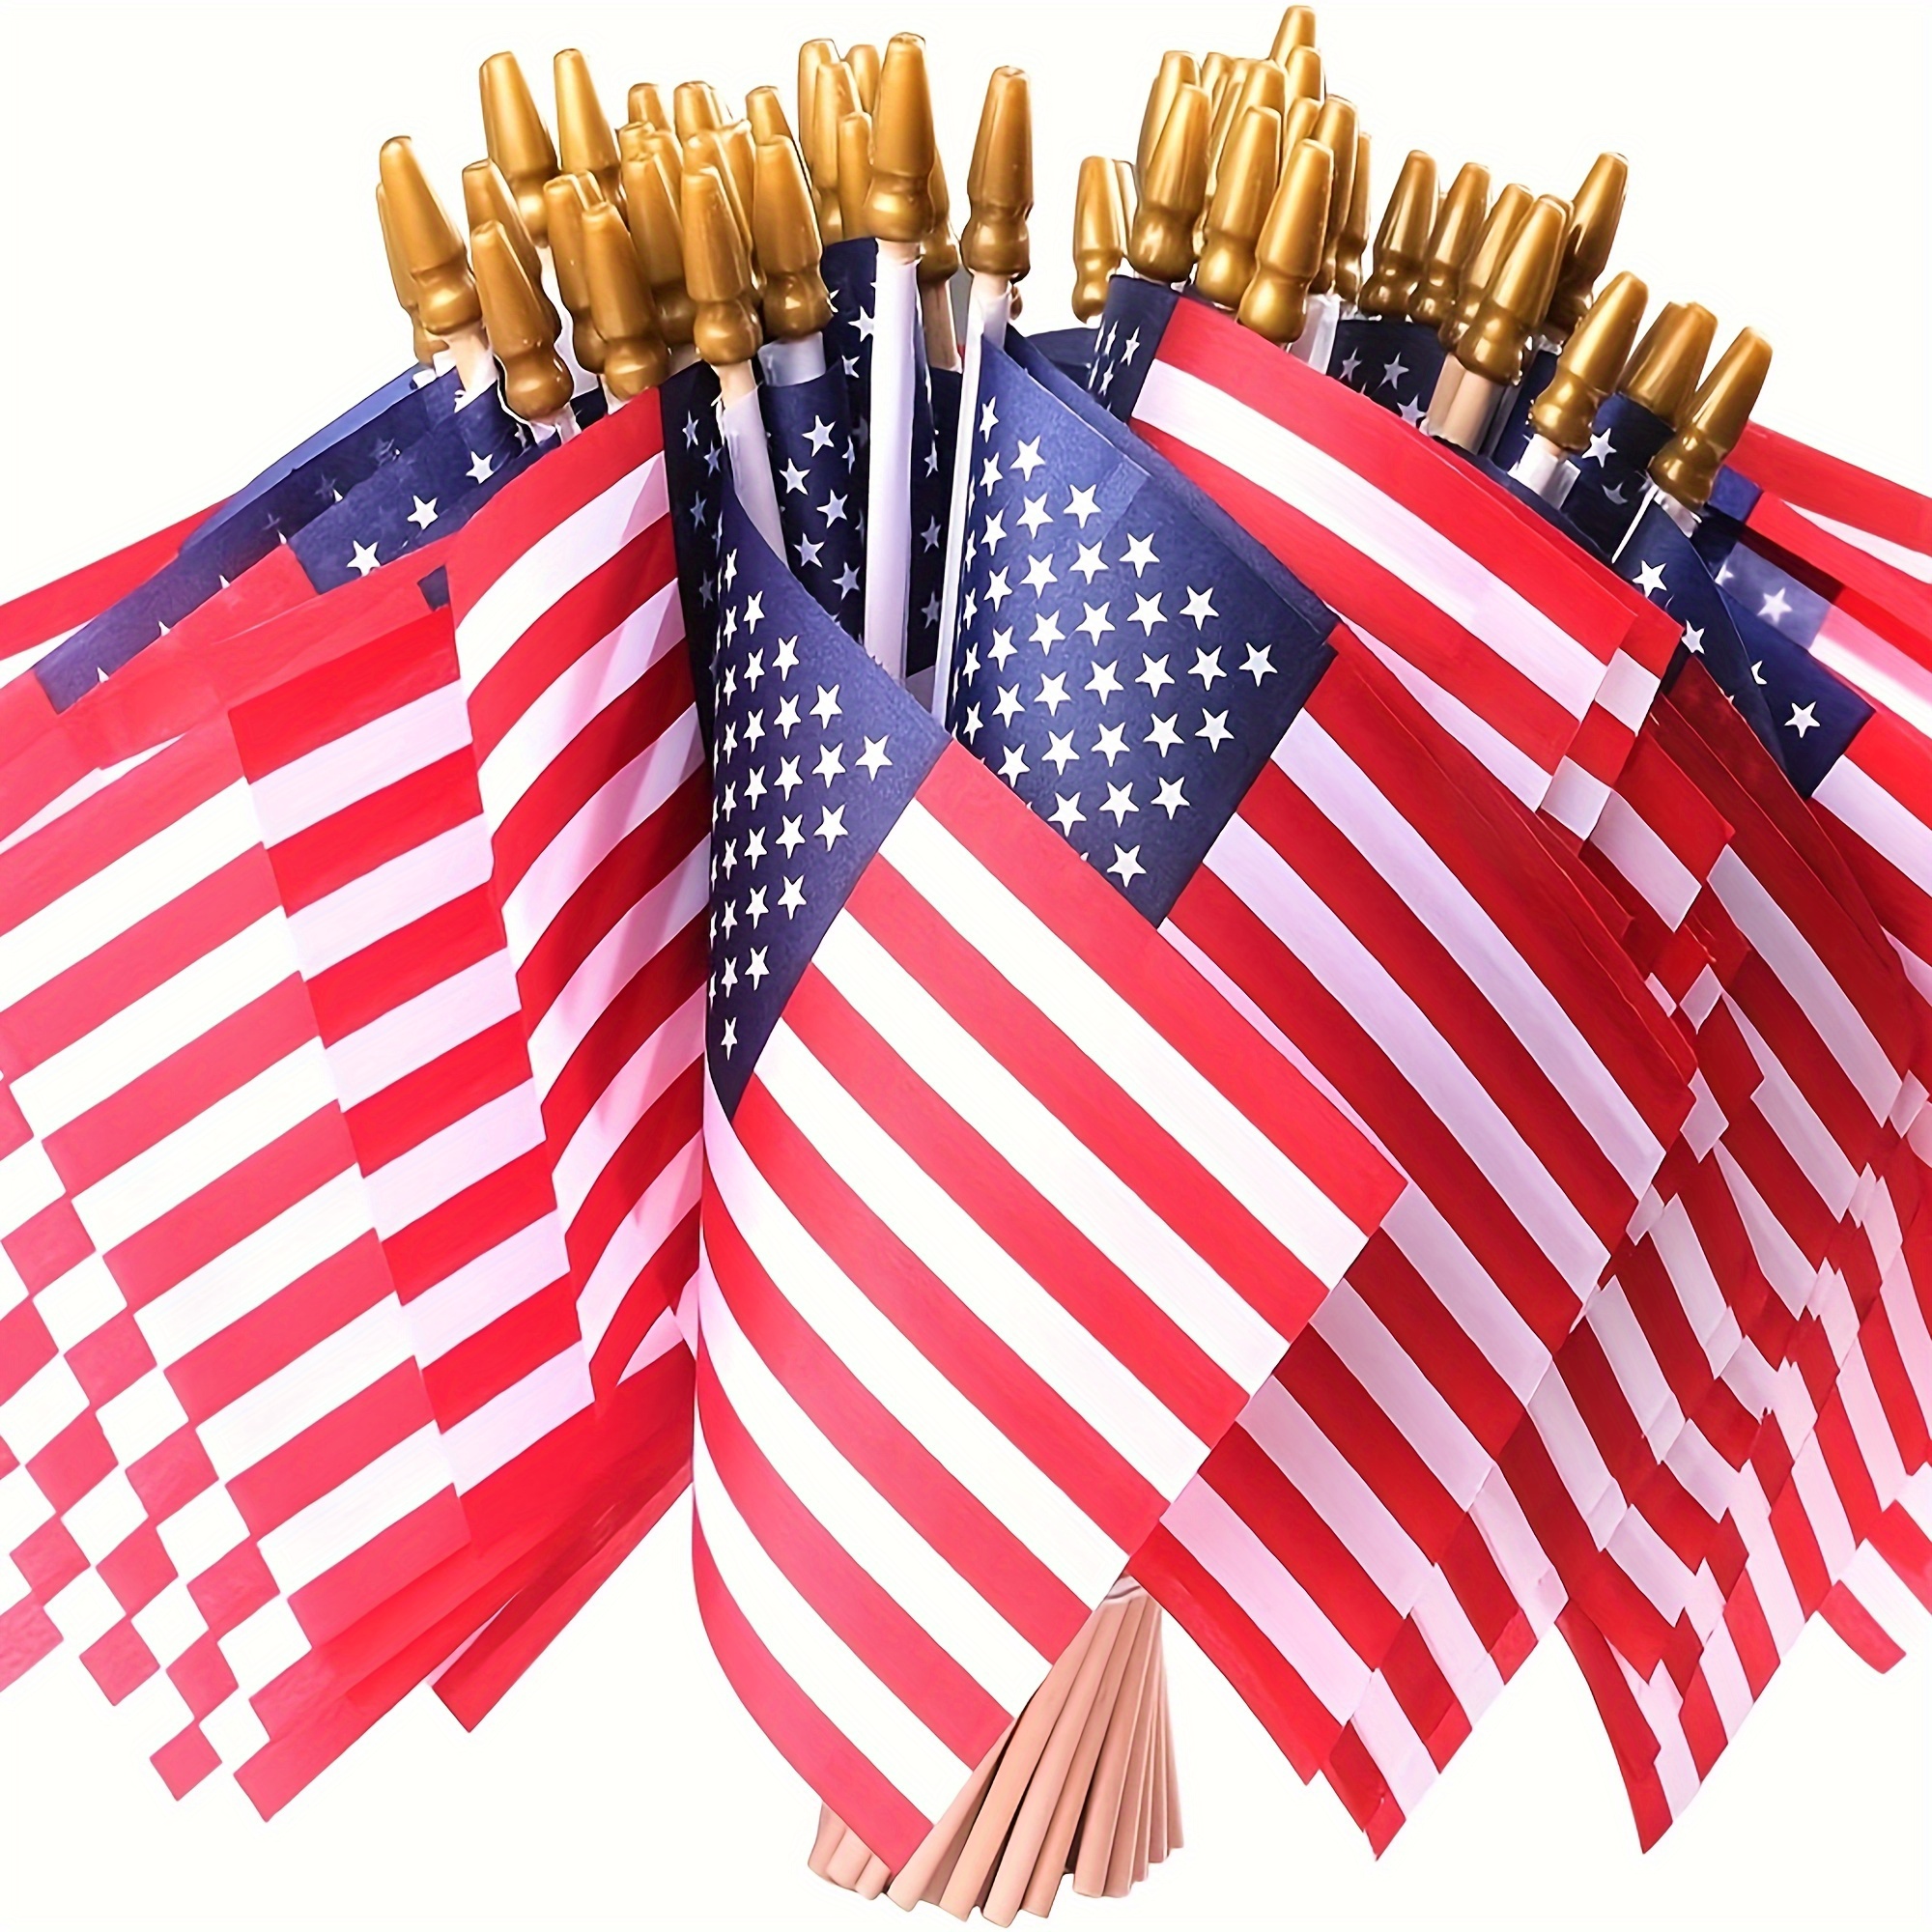 

50pcs, Small American Flags On Stick, Fourth Of July Decorations Outdoor 4''x6'' Usa Flag With Wooden Stick, Mini Flags Patriotic Decor For Garden Yard, Festival Decorative Flag Double Sided Printing